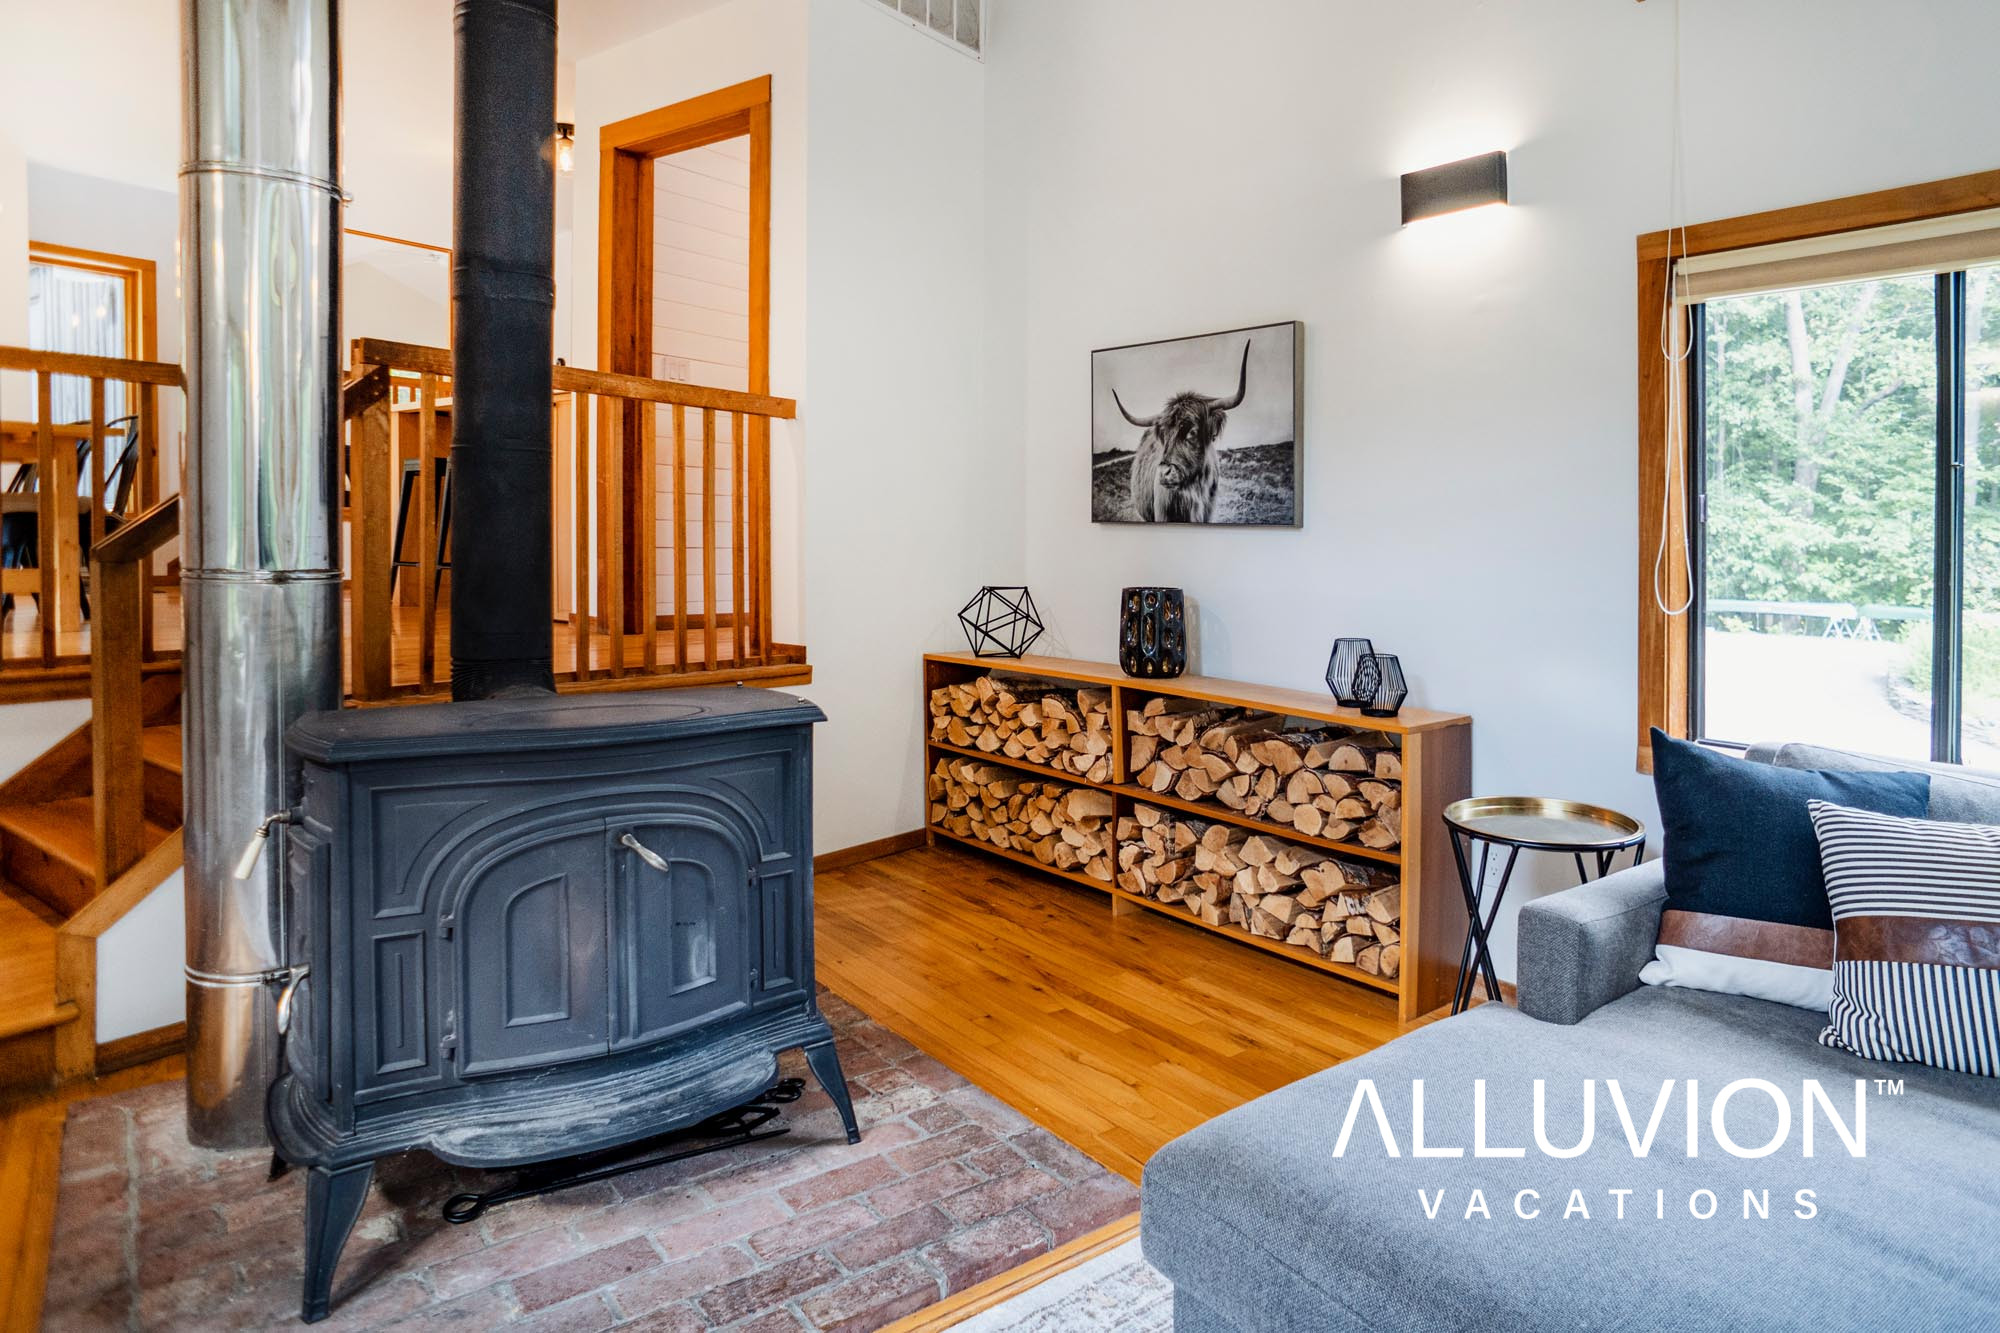 Modern Rustic Airbnb Home in Warwick, NY – Catskills Mountains Short Term Rental by Alluvion Vacations – Photography by Maxwell Alexander, Alluvion Media 